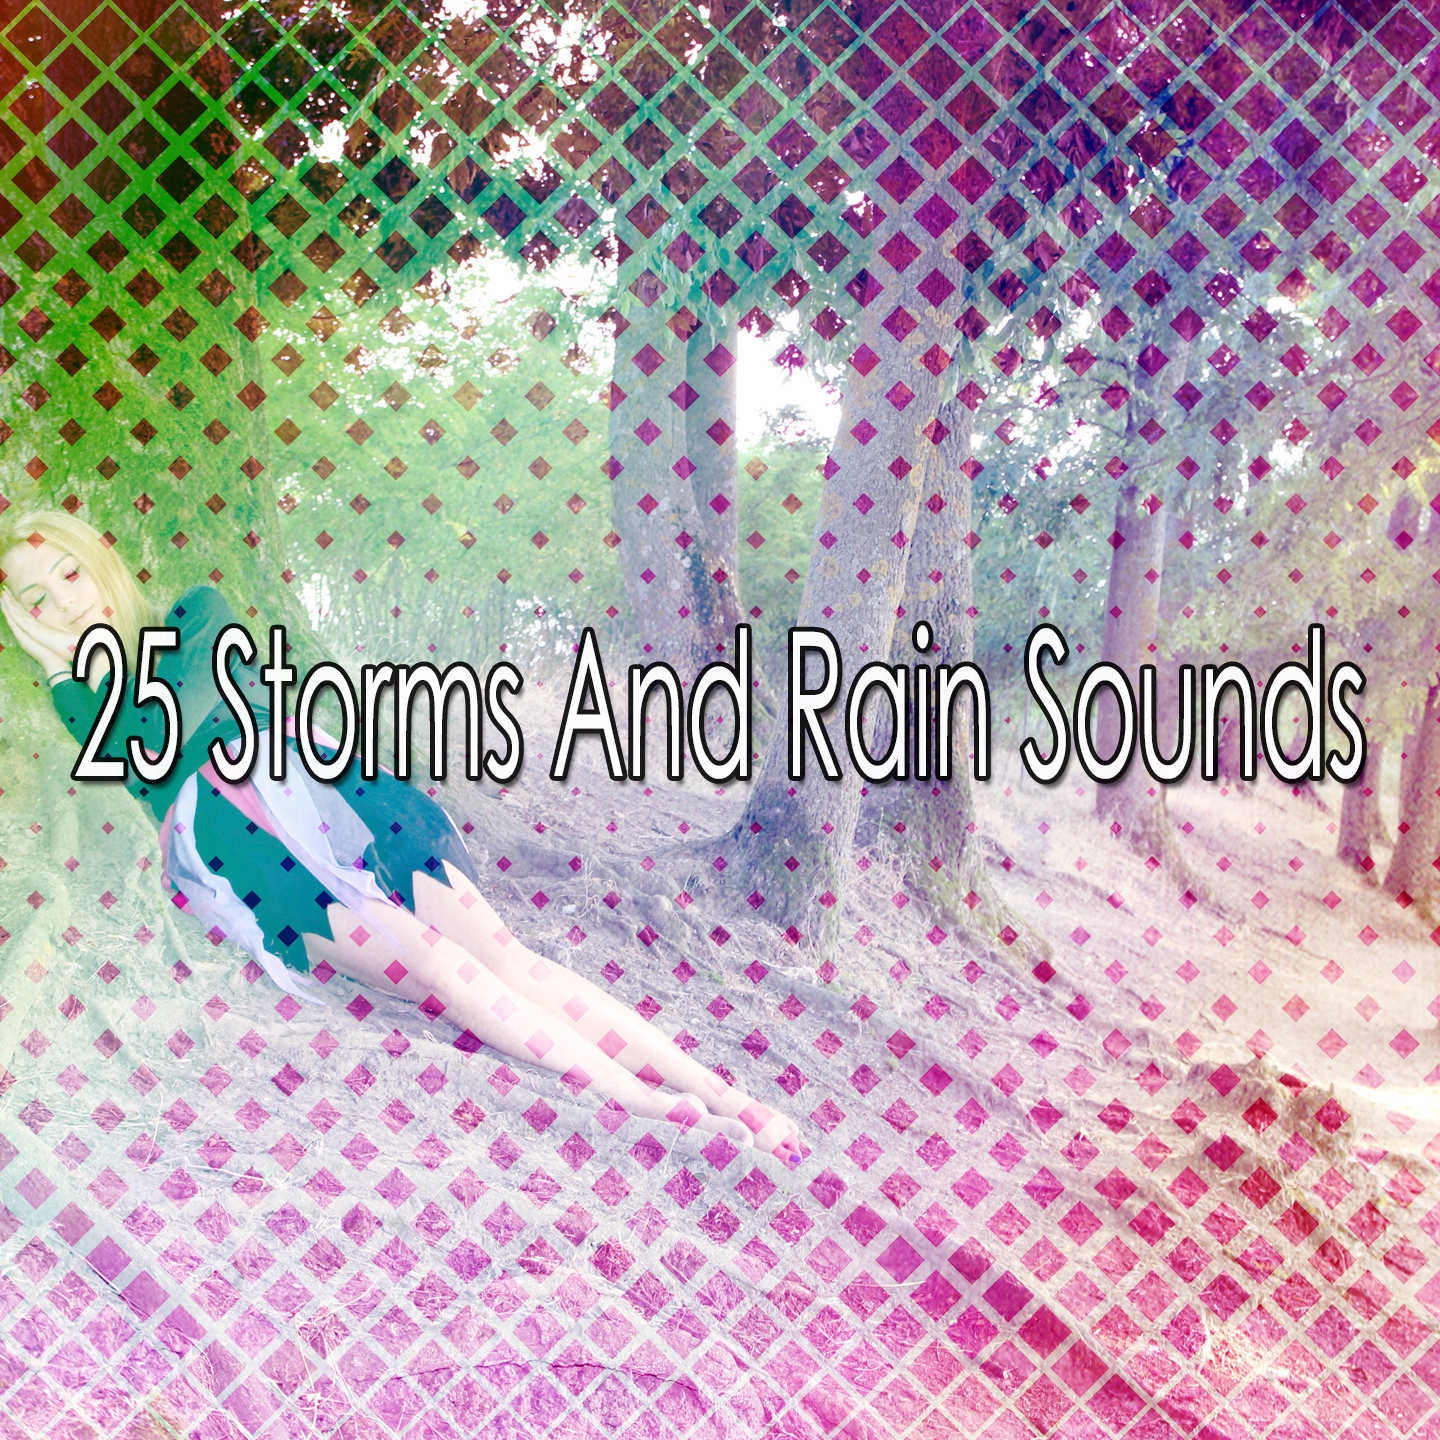 25 Storms And Rain Sounds